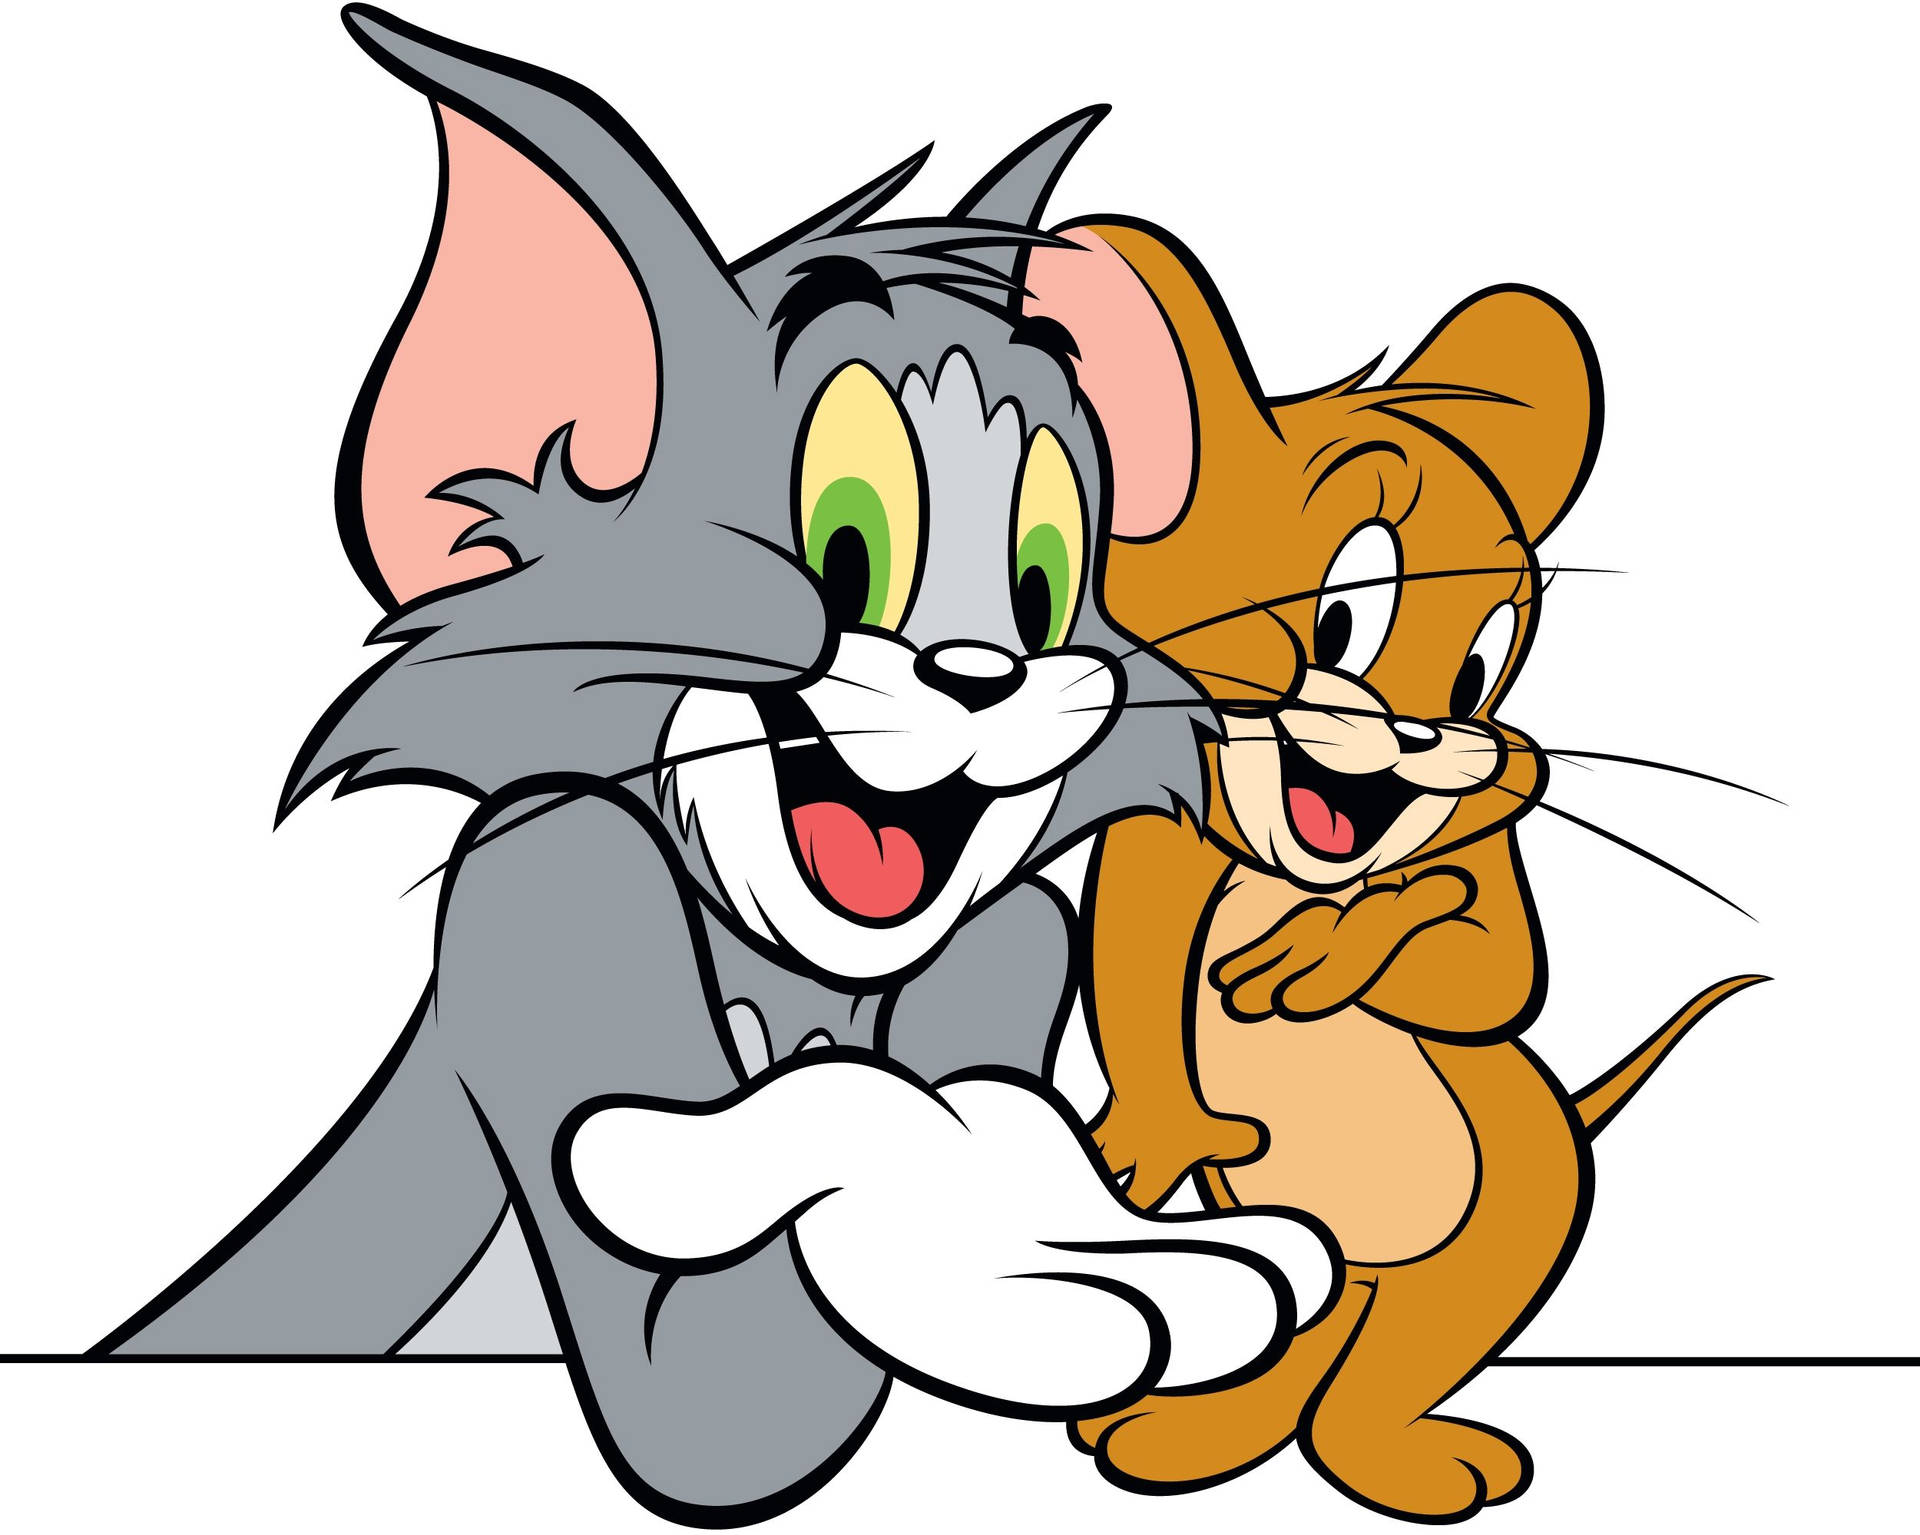 Tom and Jerry 2K wallpaper download